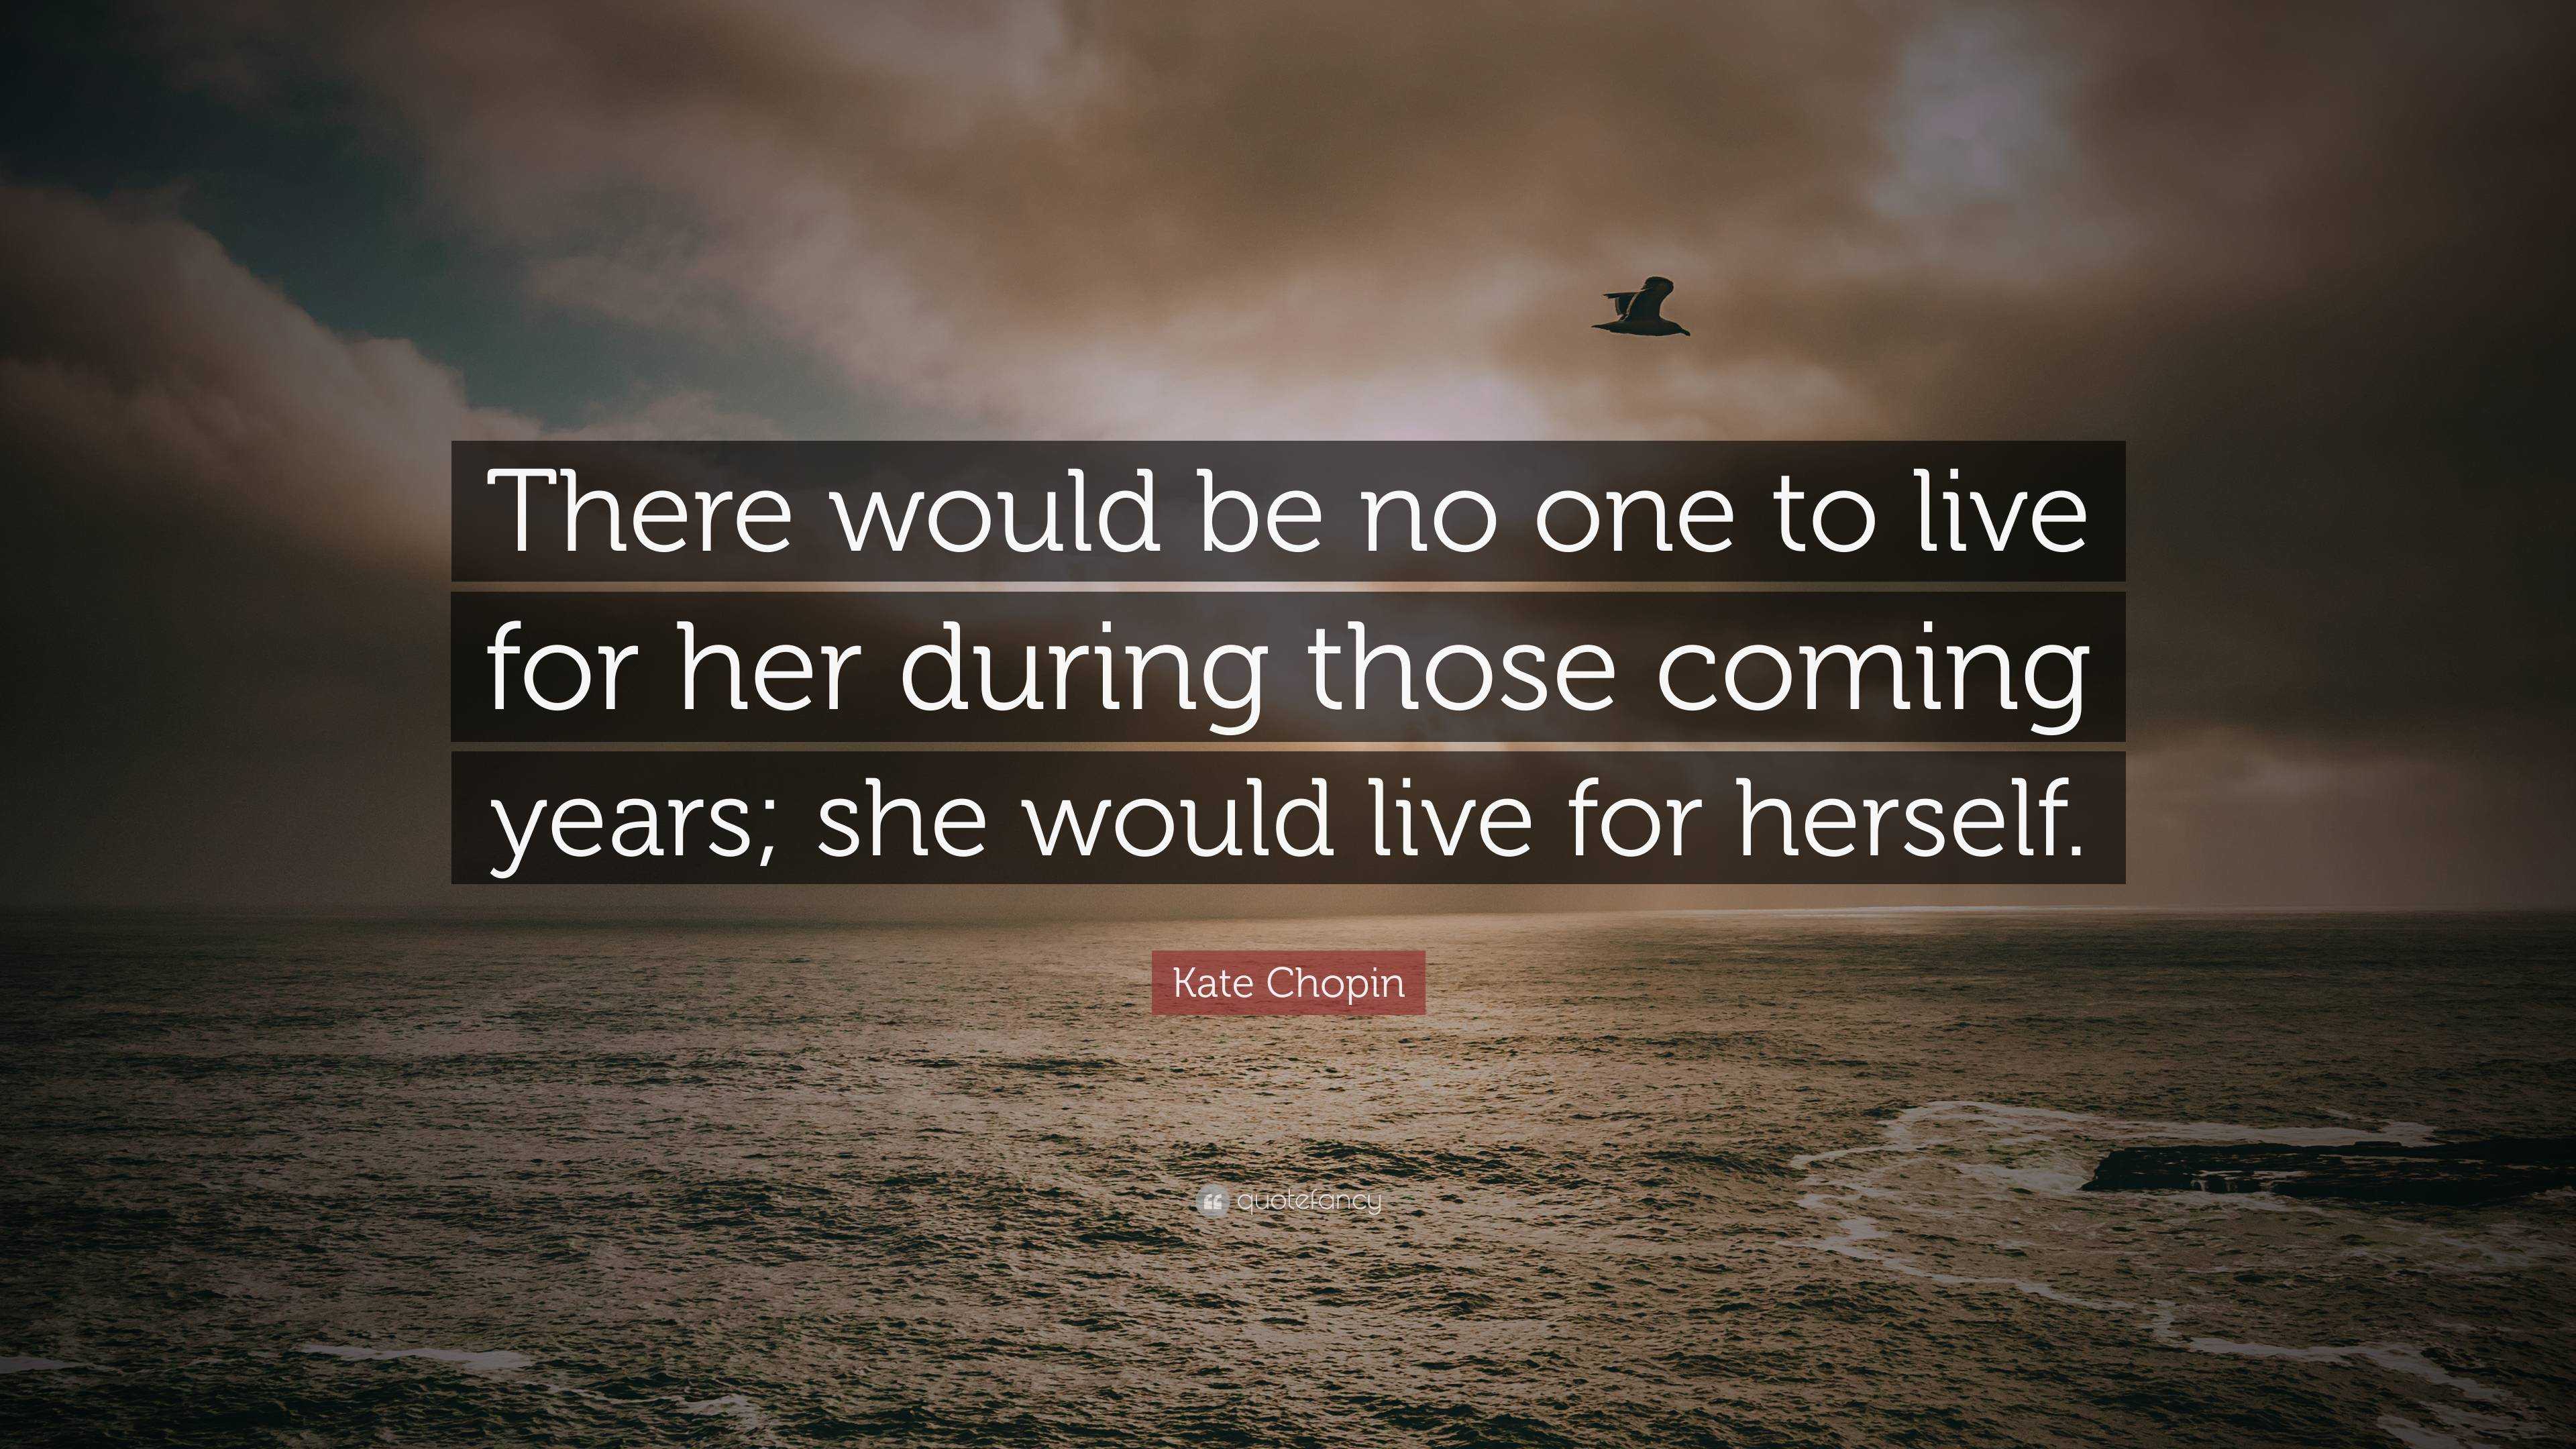 Kate Chopin Quote: "There would be no one to live for her ...